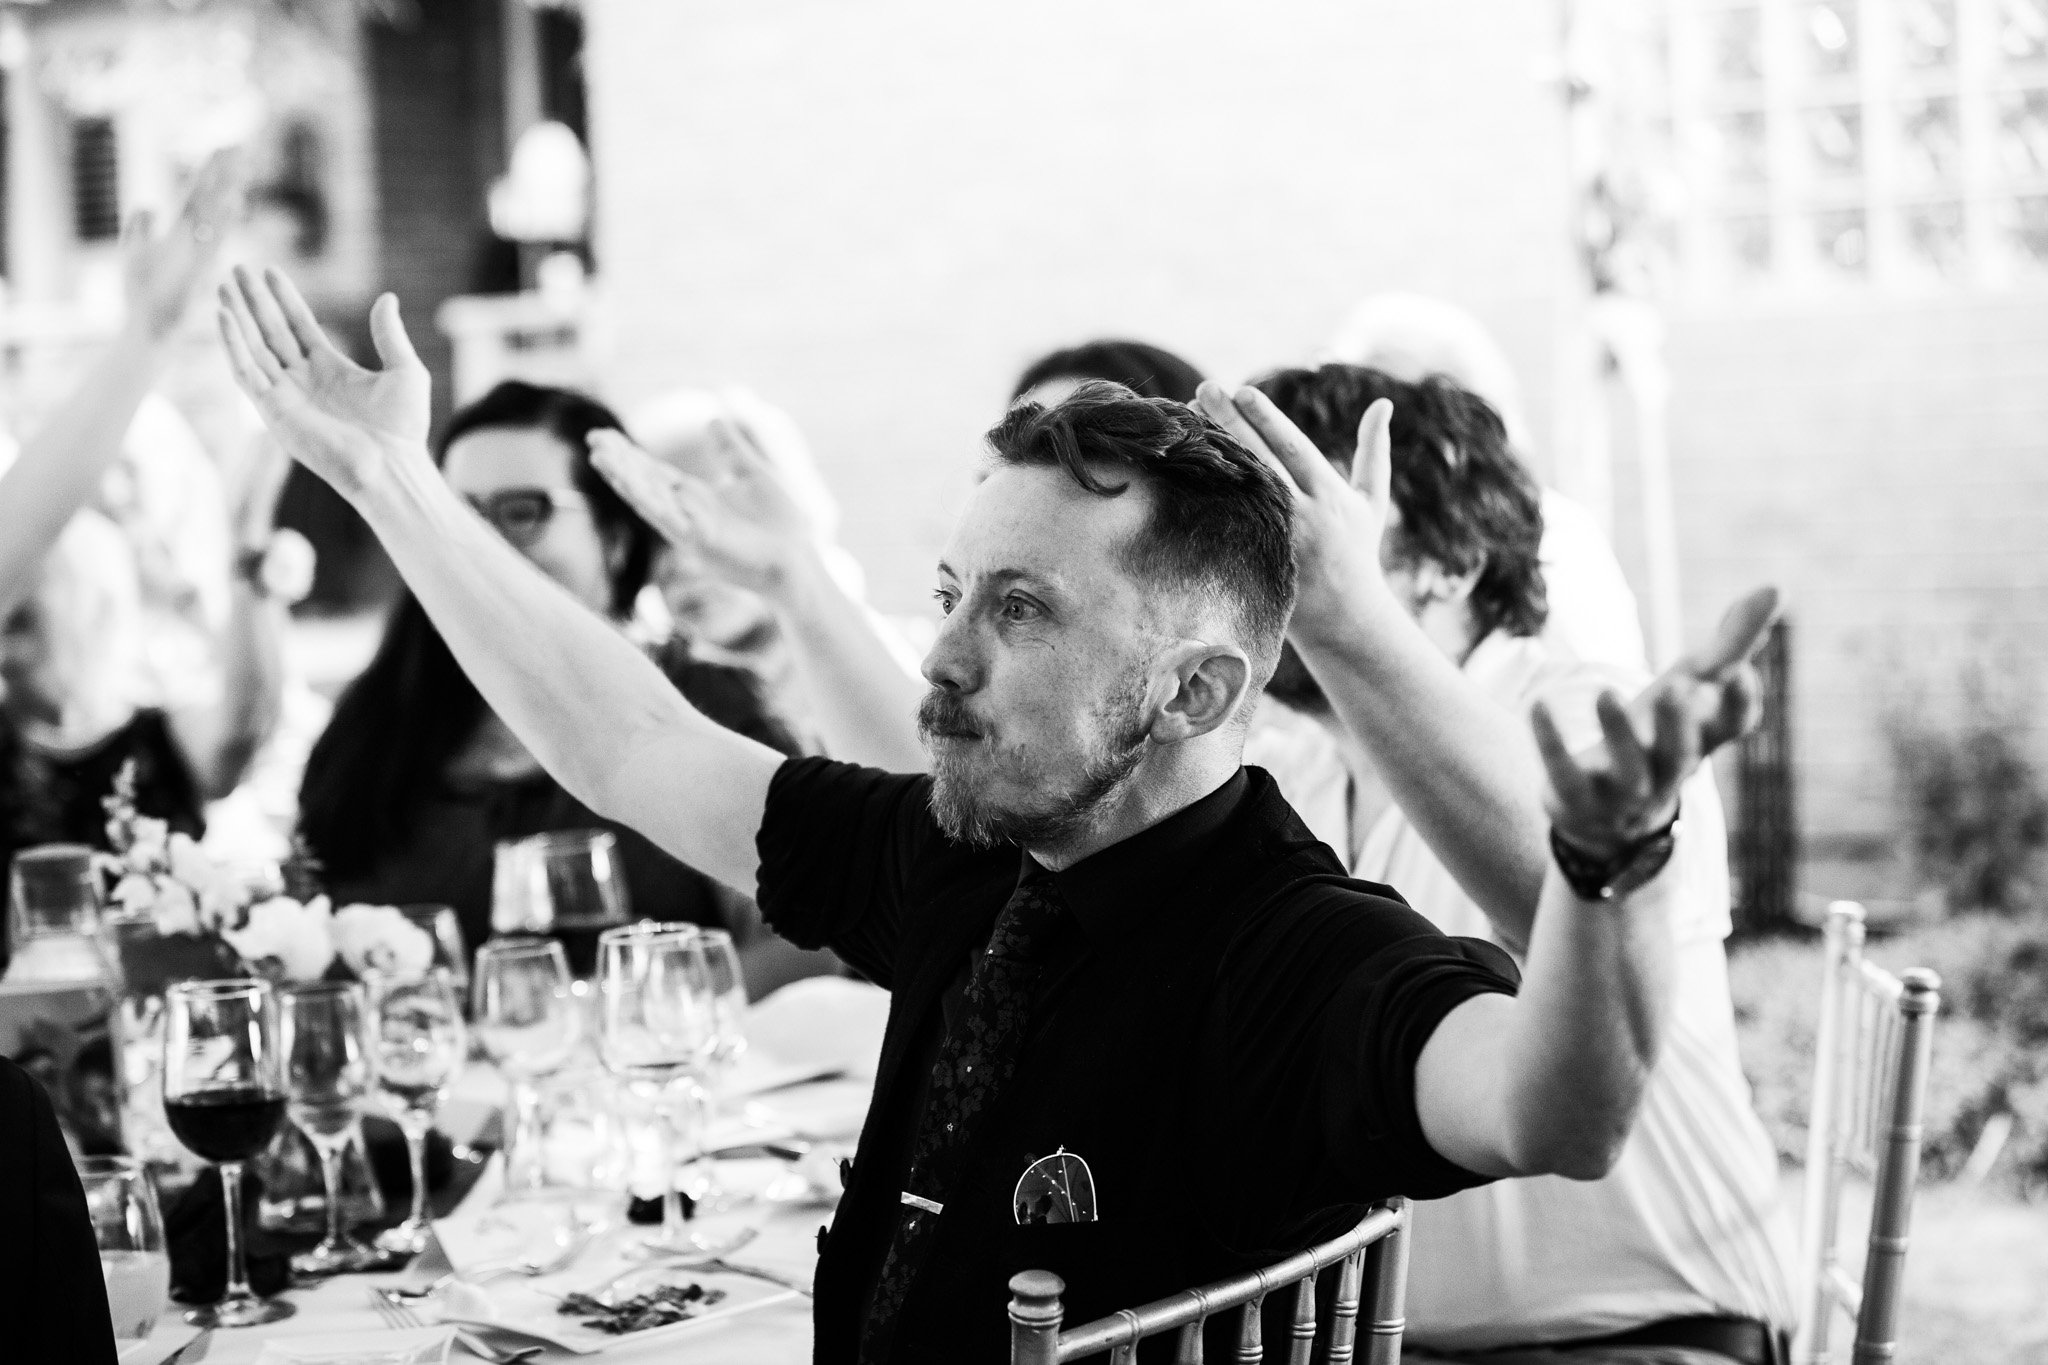 wedding guest gesturing arms wide during wedding reception - black and white wedding photography.jpg